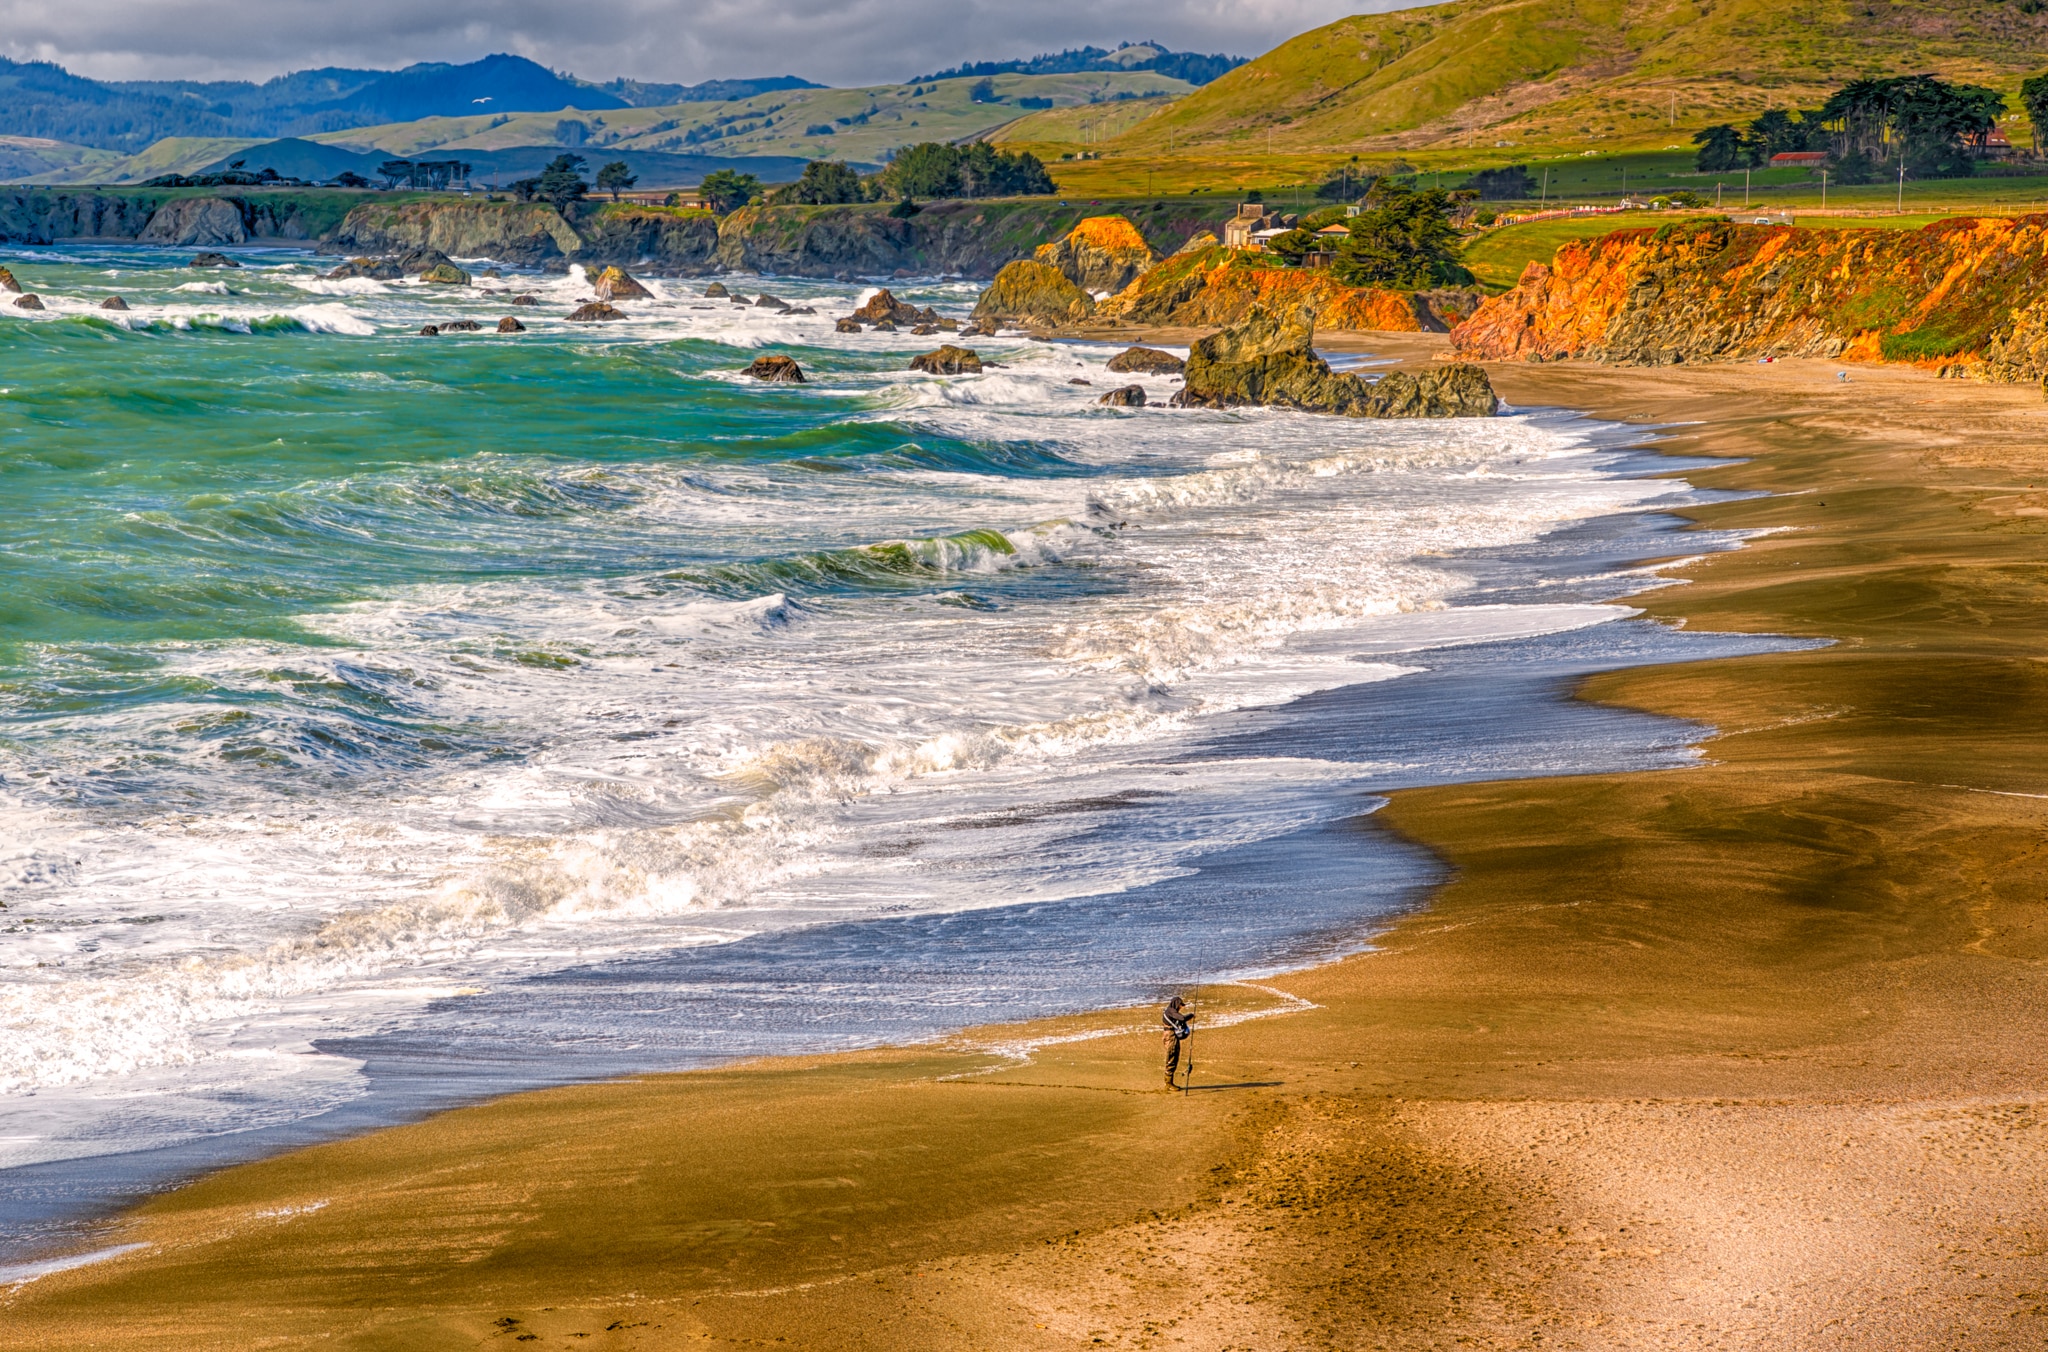 People in Nature - A fisherman enjoys an afternoon on the beach at Duncan's Landing, along CA Highway 1 in California. California's Pacific Coast